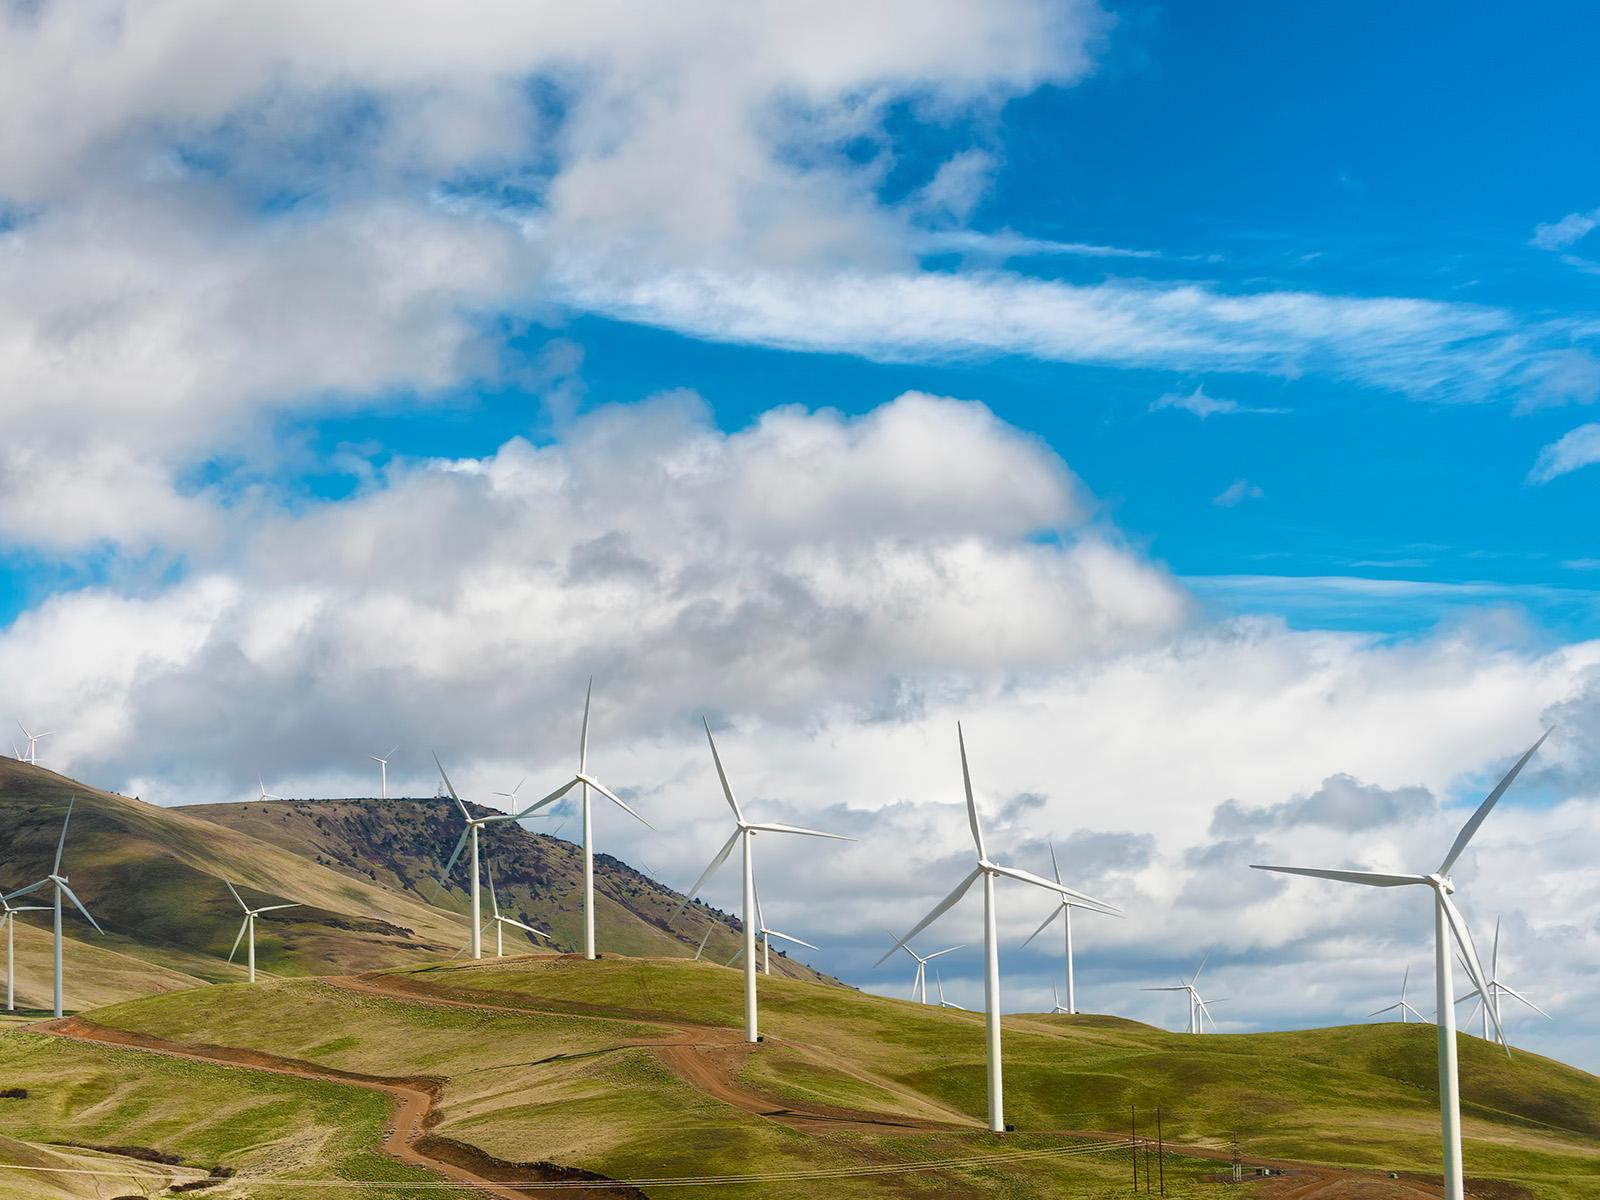 Photograph shows a hillside with wind turbines against a blue sky.